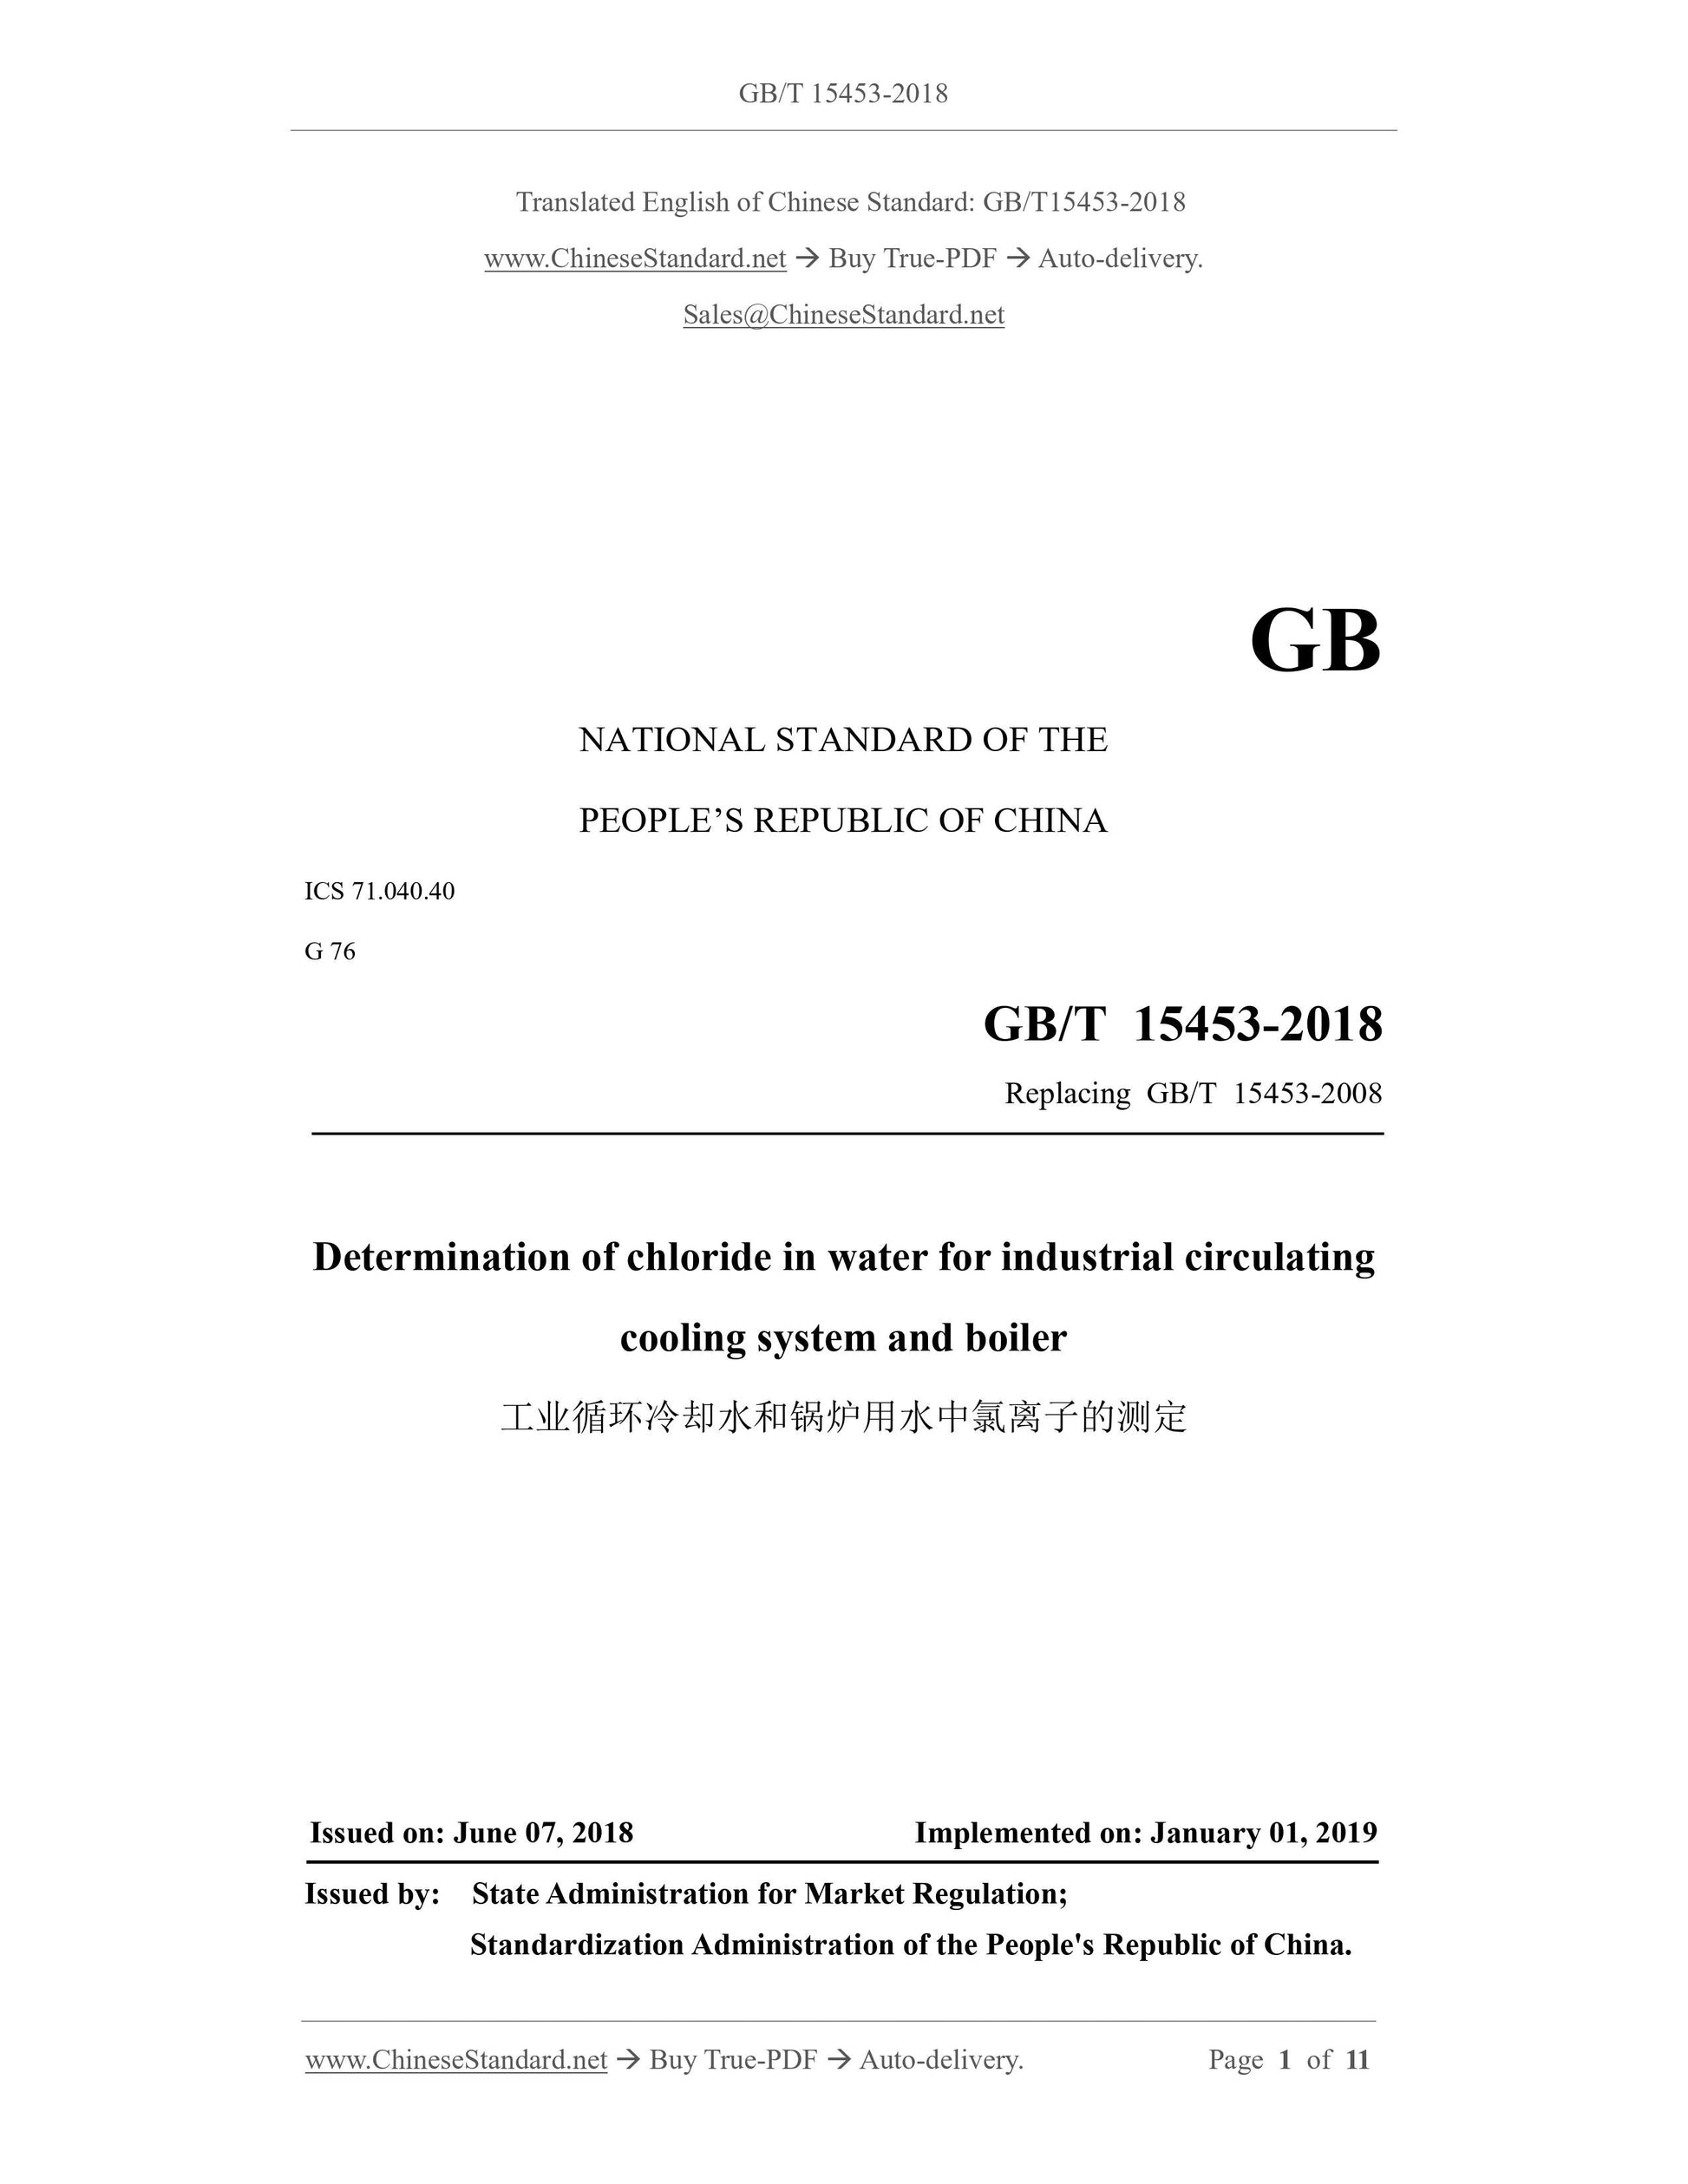 GB/T 15453-2018 Page 1